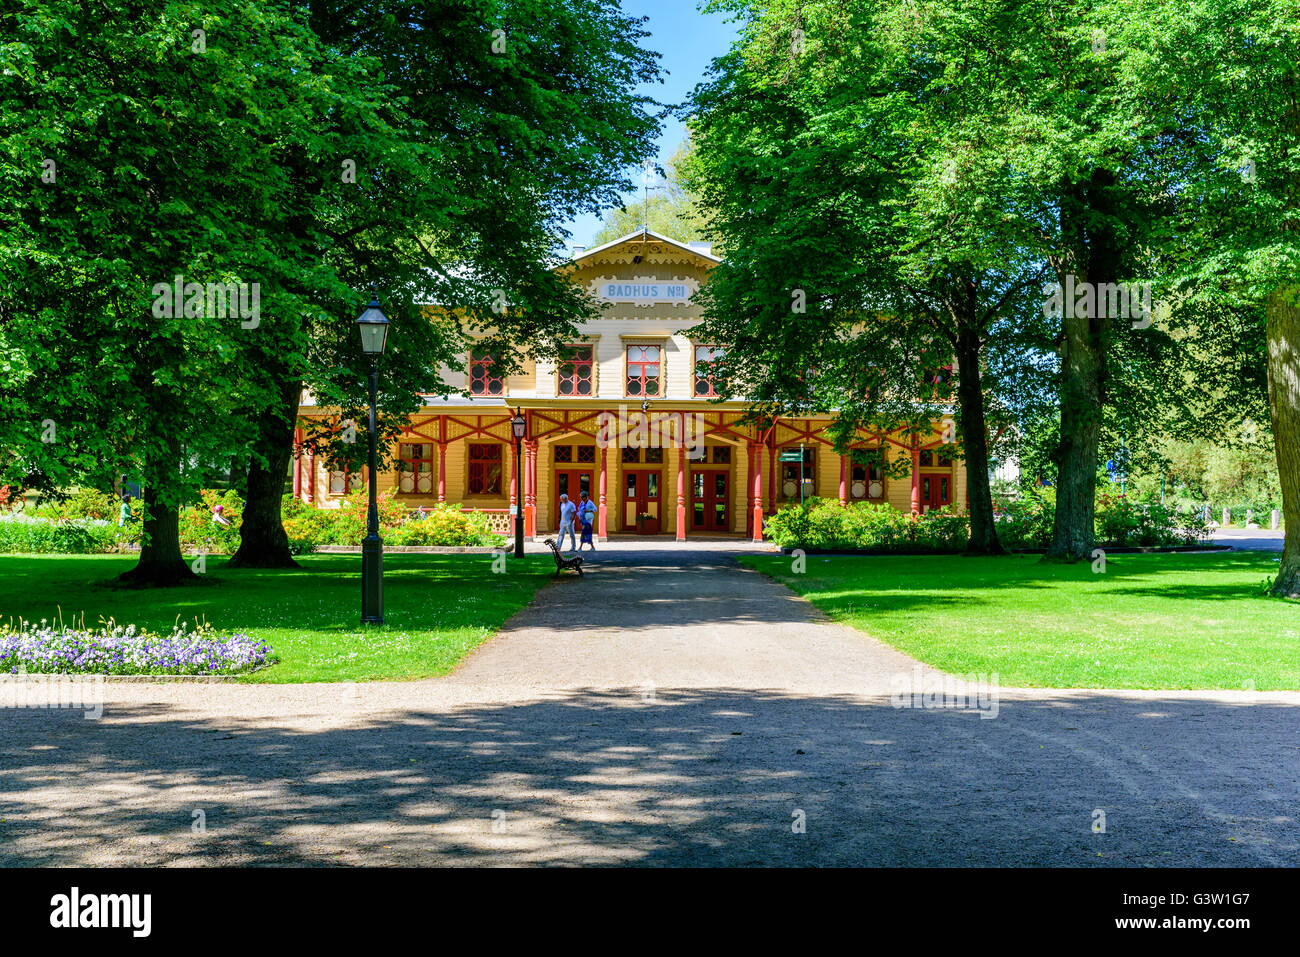 Ronneby, Sweden - June 6, 2016: Bathing house number one seen from the front with people walking by. Stock Photo